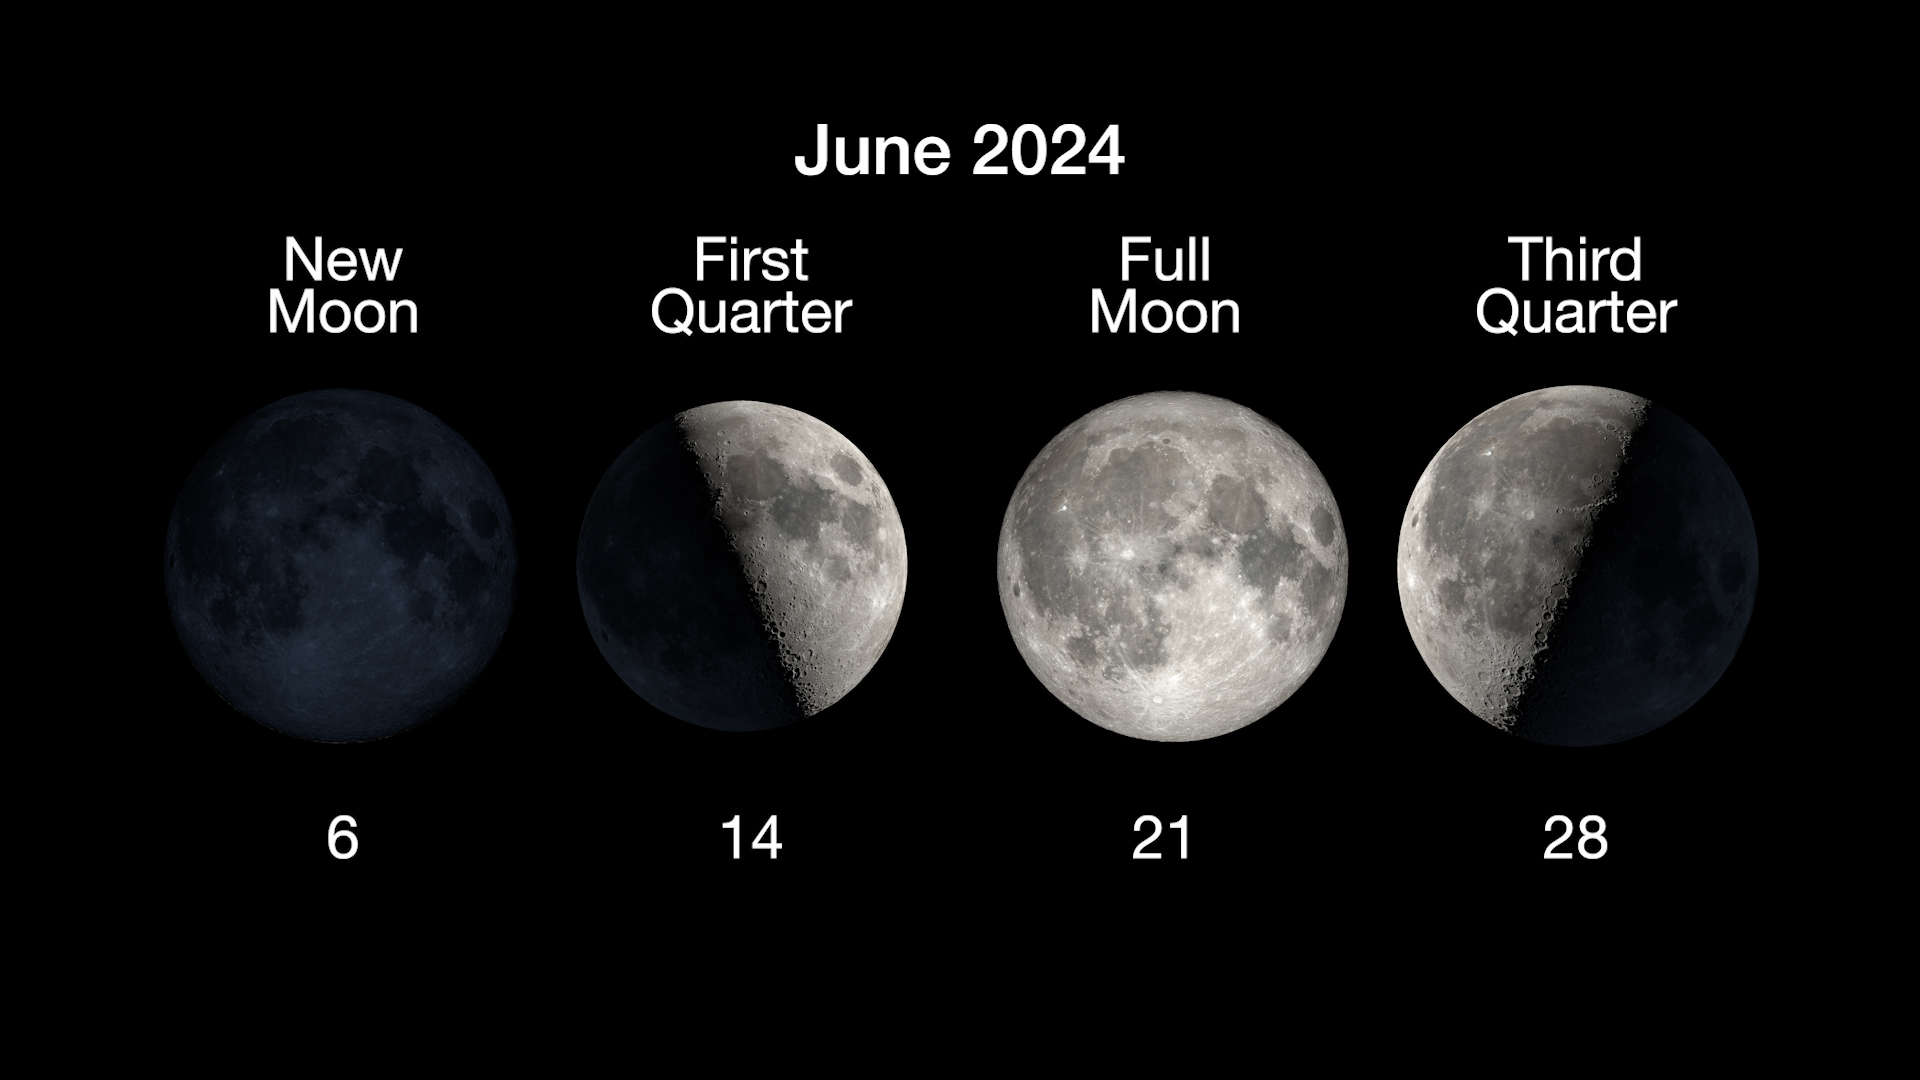 The main phases of the Moon are illustrated in a horizontal row, with the new moon on June 6th, first quarter on June 14th, full moon on June 21st, and the third quarter moon on June 28th.